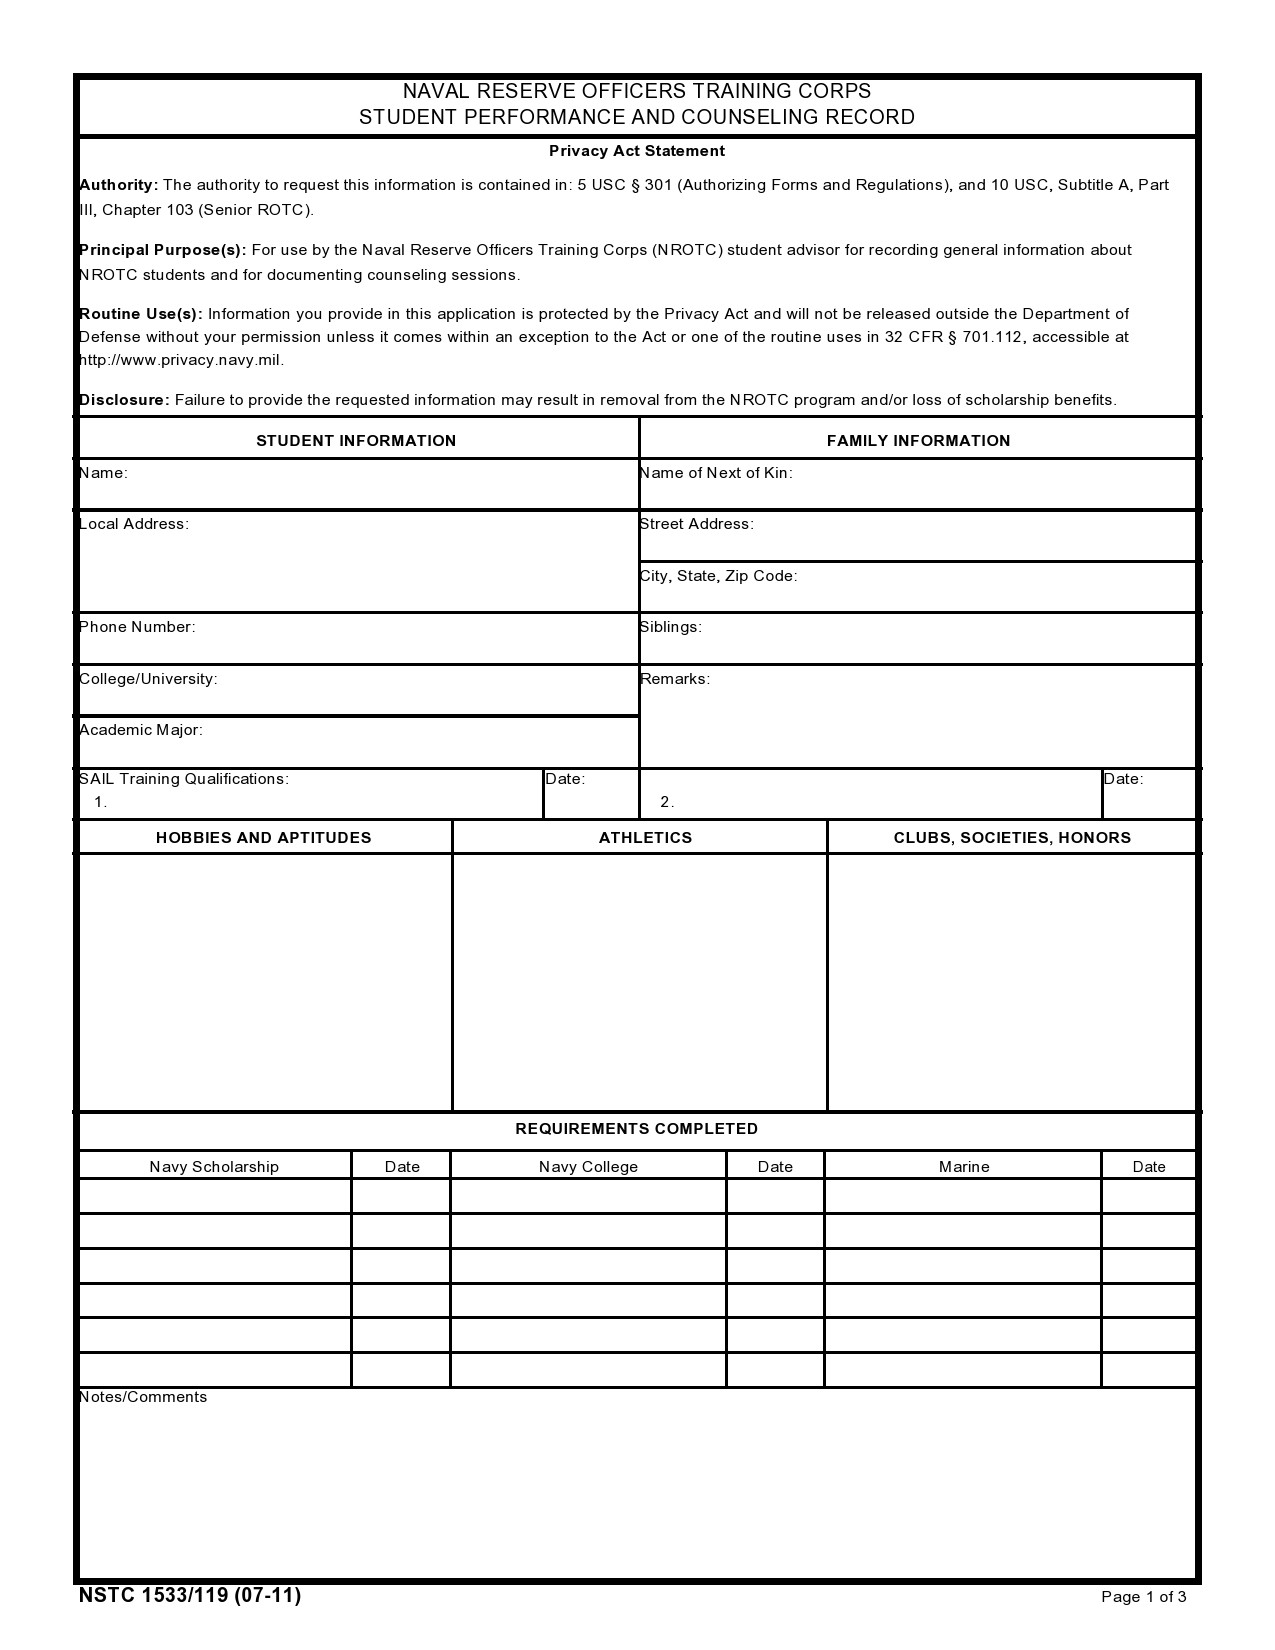 Free army counseling form 14